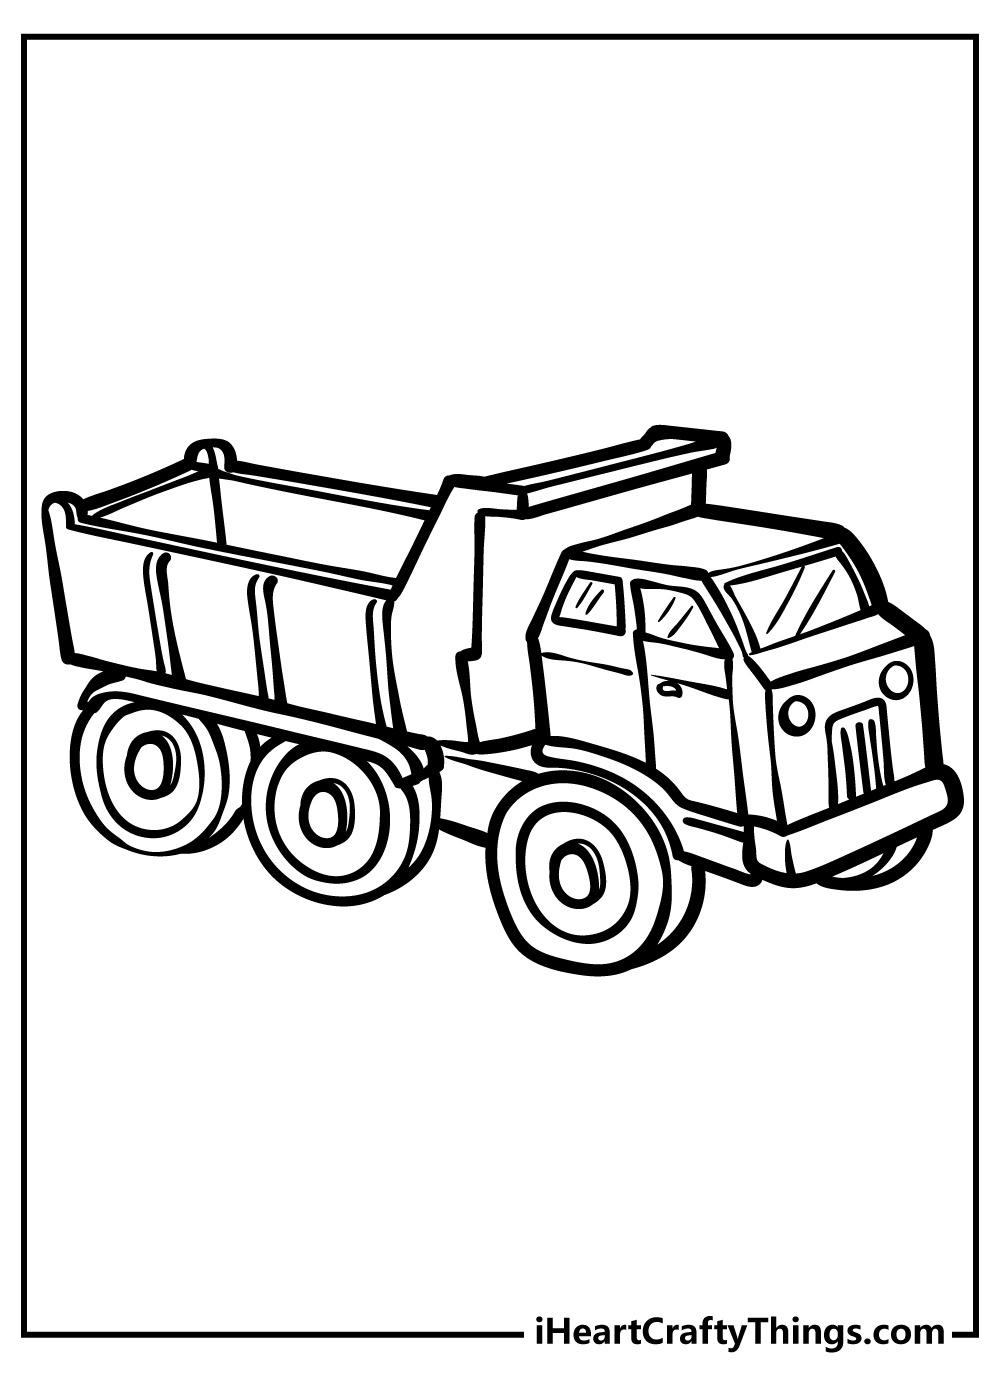 Dump Truck coloring pages free printable